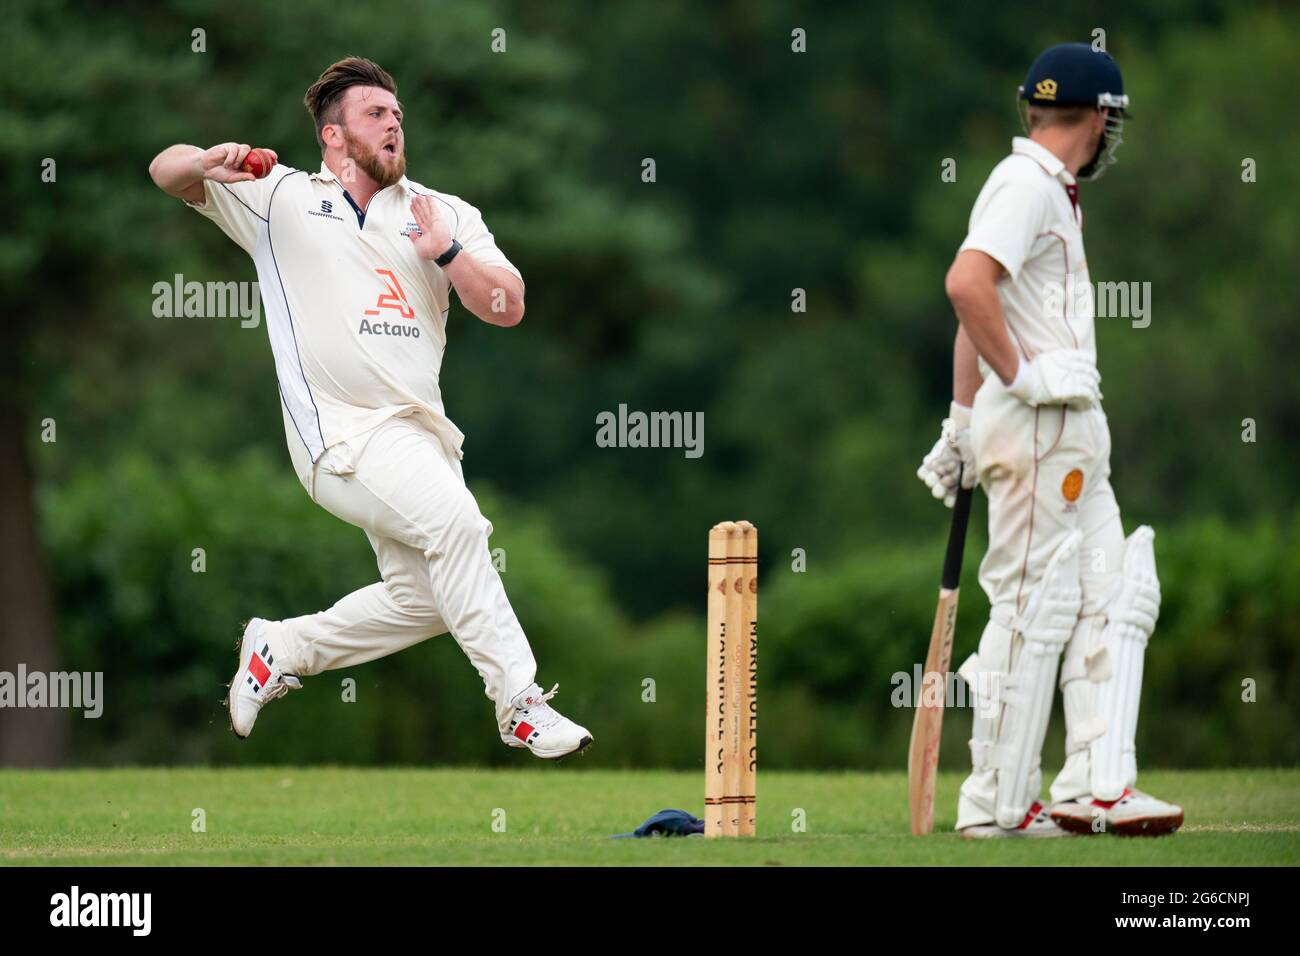 Bowler in action. Stock Photo